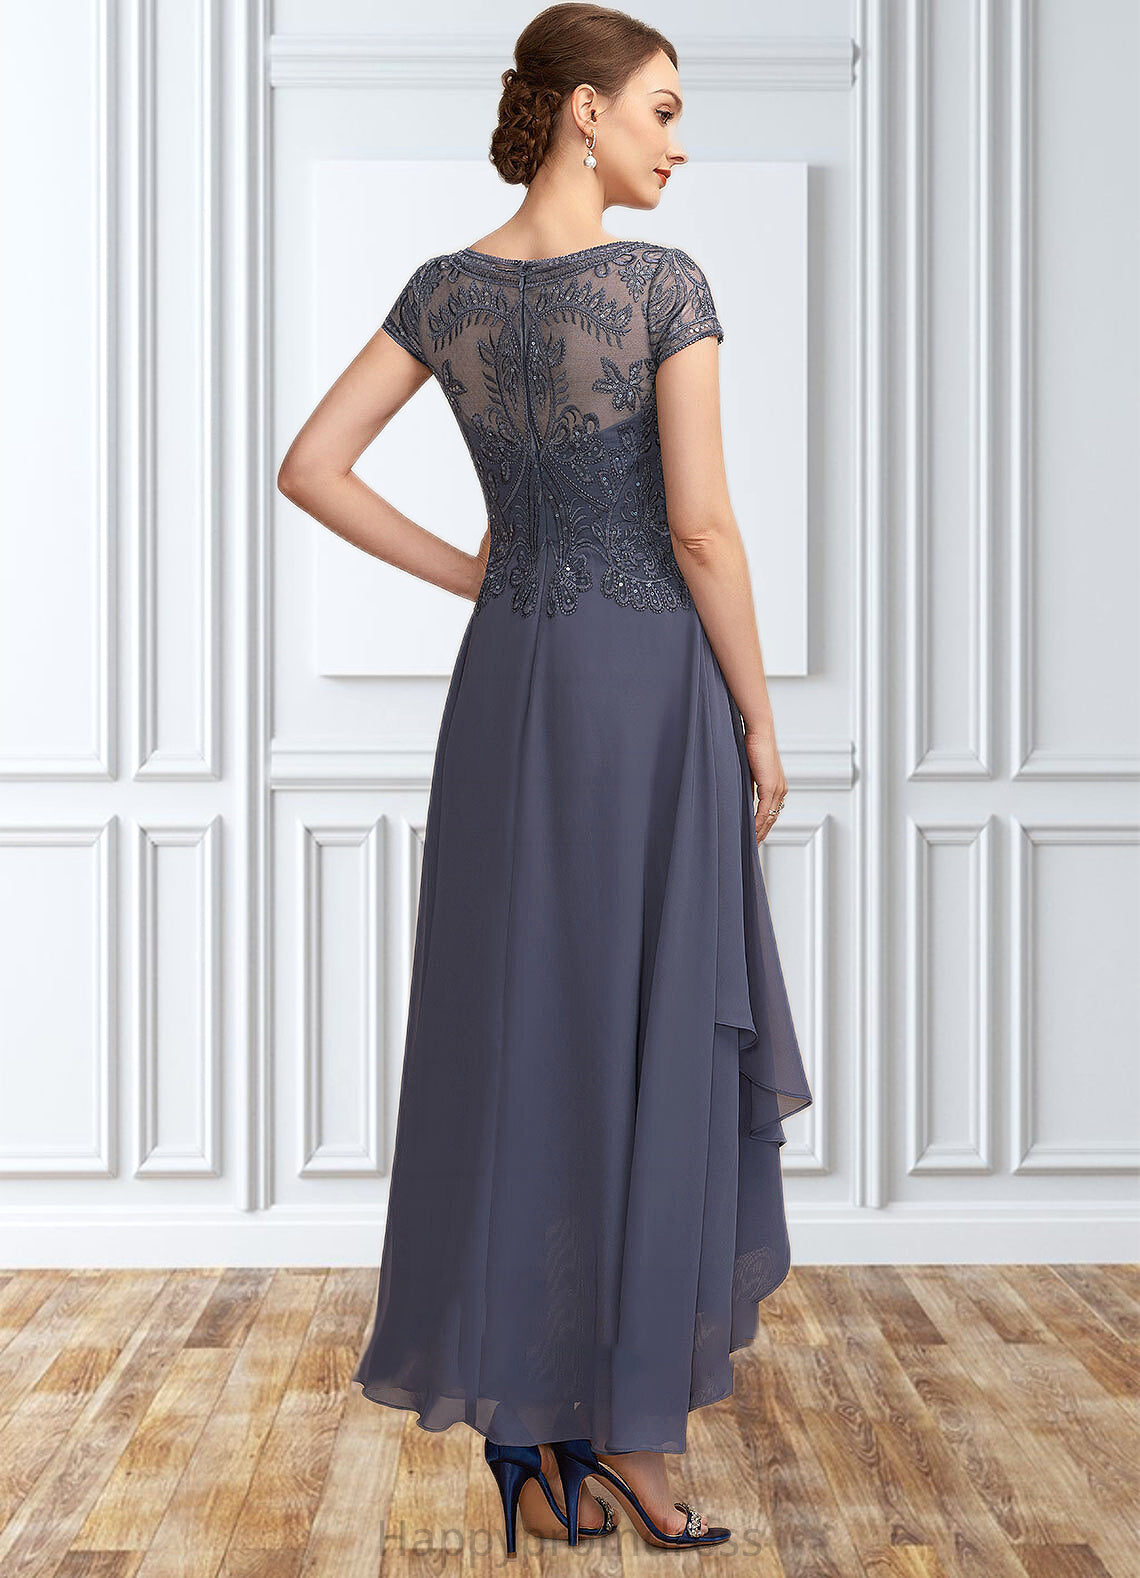 Scarlett A-Line Scoop Neck Asymmetrical Chiffon Lace Mother of the Bride Dress With Sequins XXS126P0014667